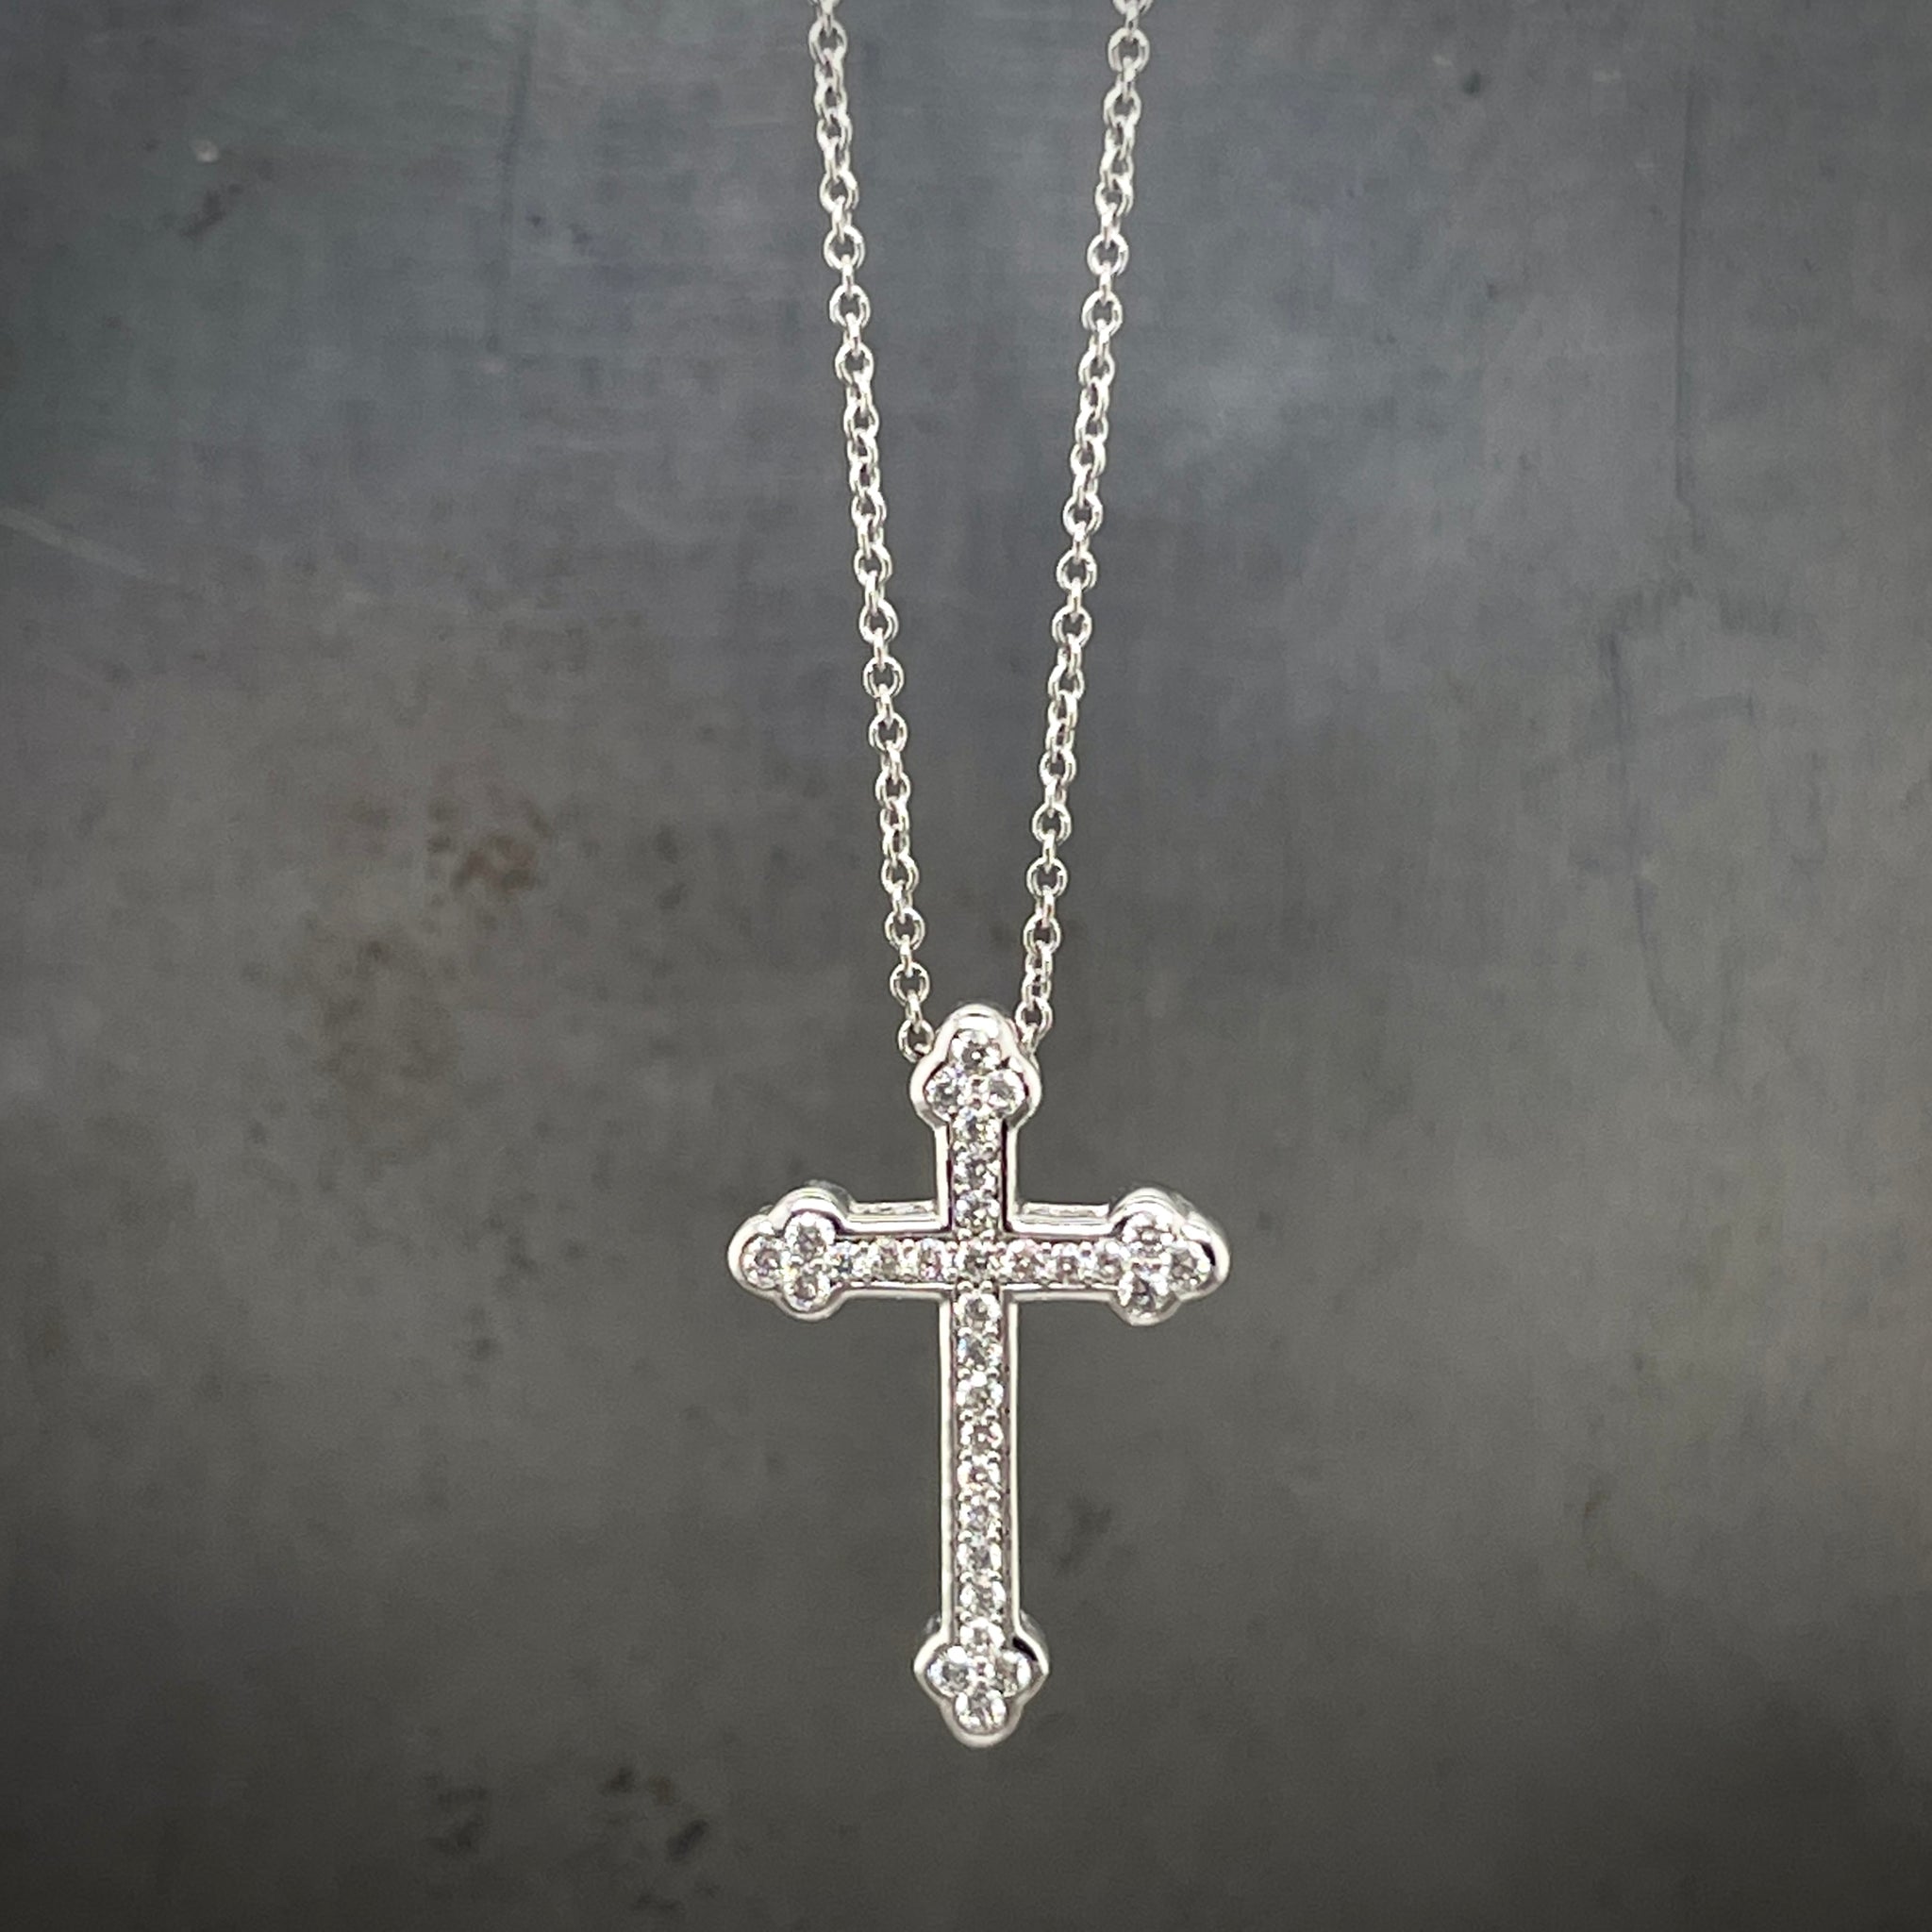 Close up view of diamond cross hanging on gray background.